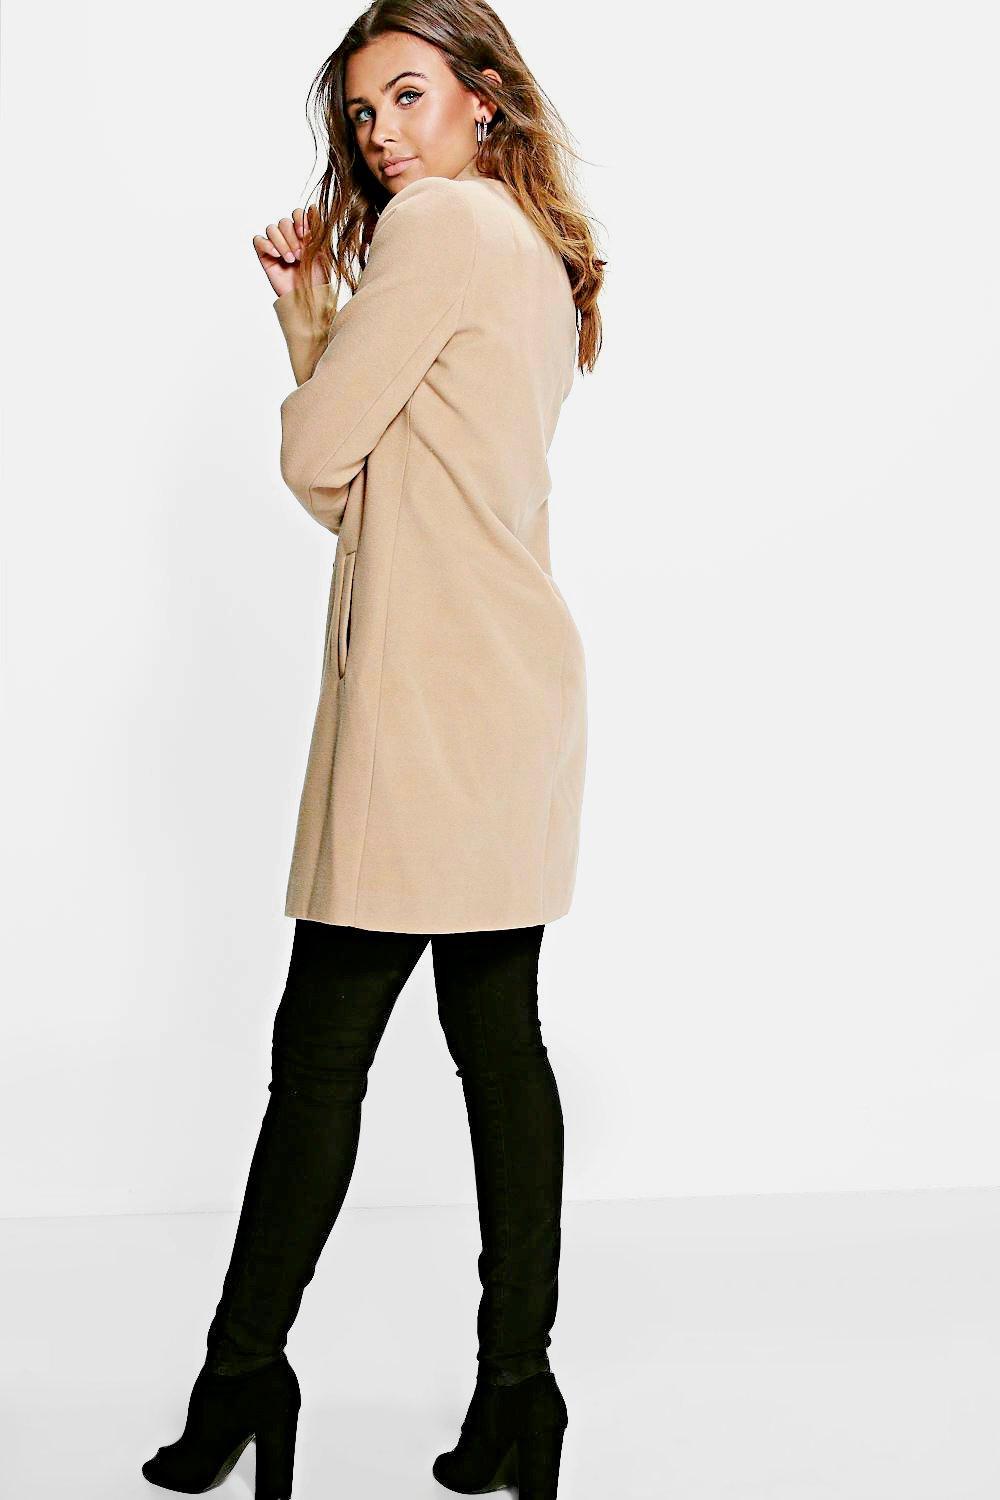 Boohoo Petite Double Breasted Camel Duster Coat in Beige (Natural) - Lyst